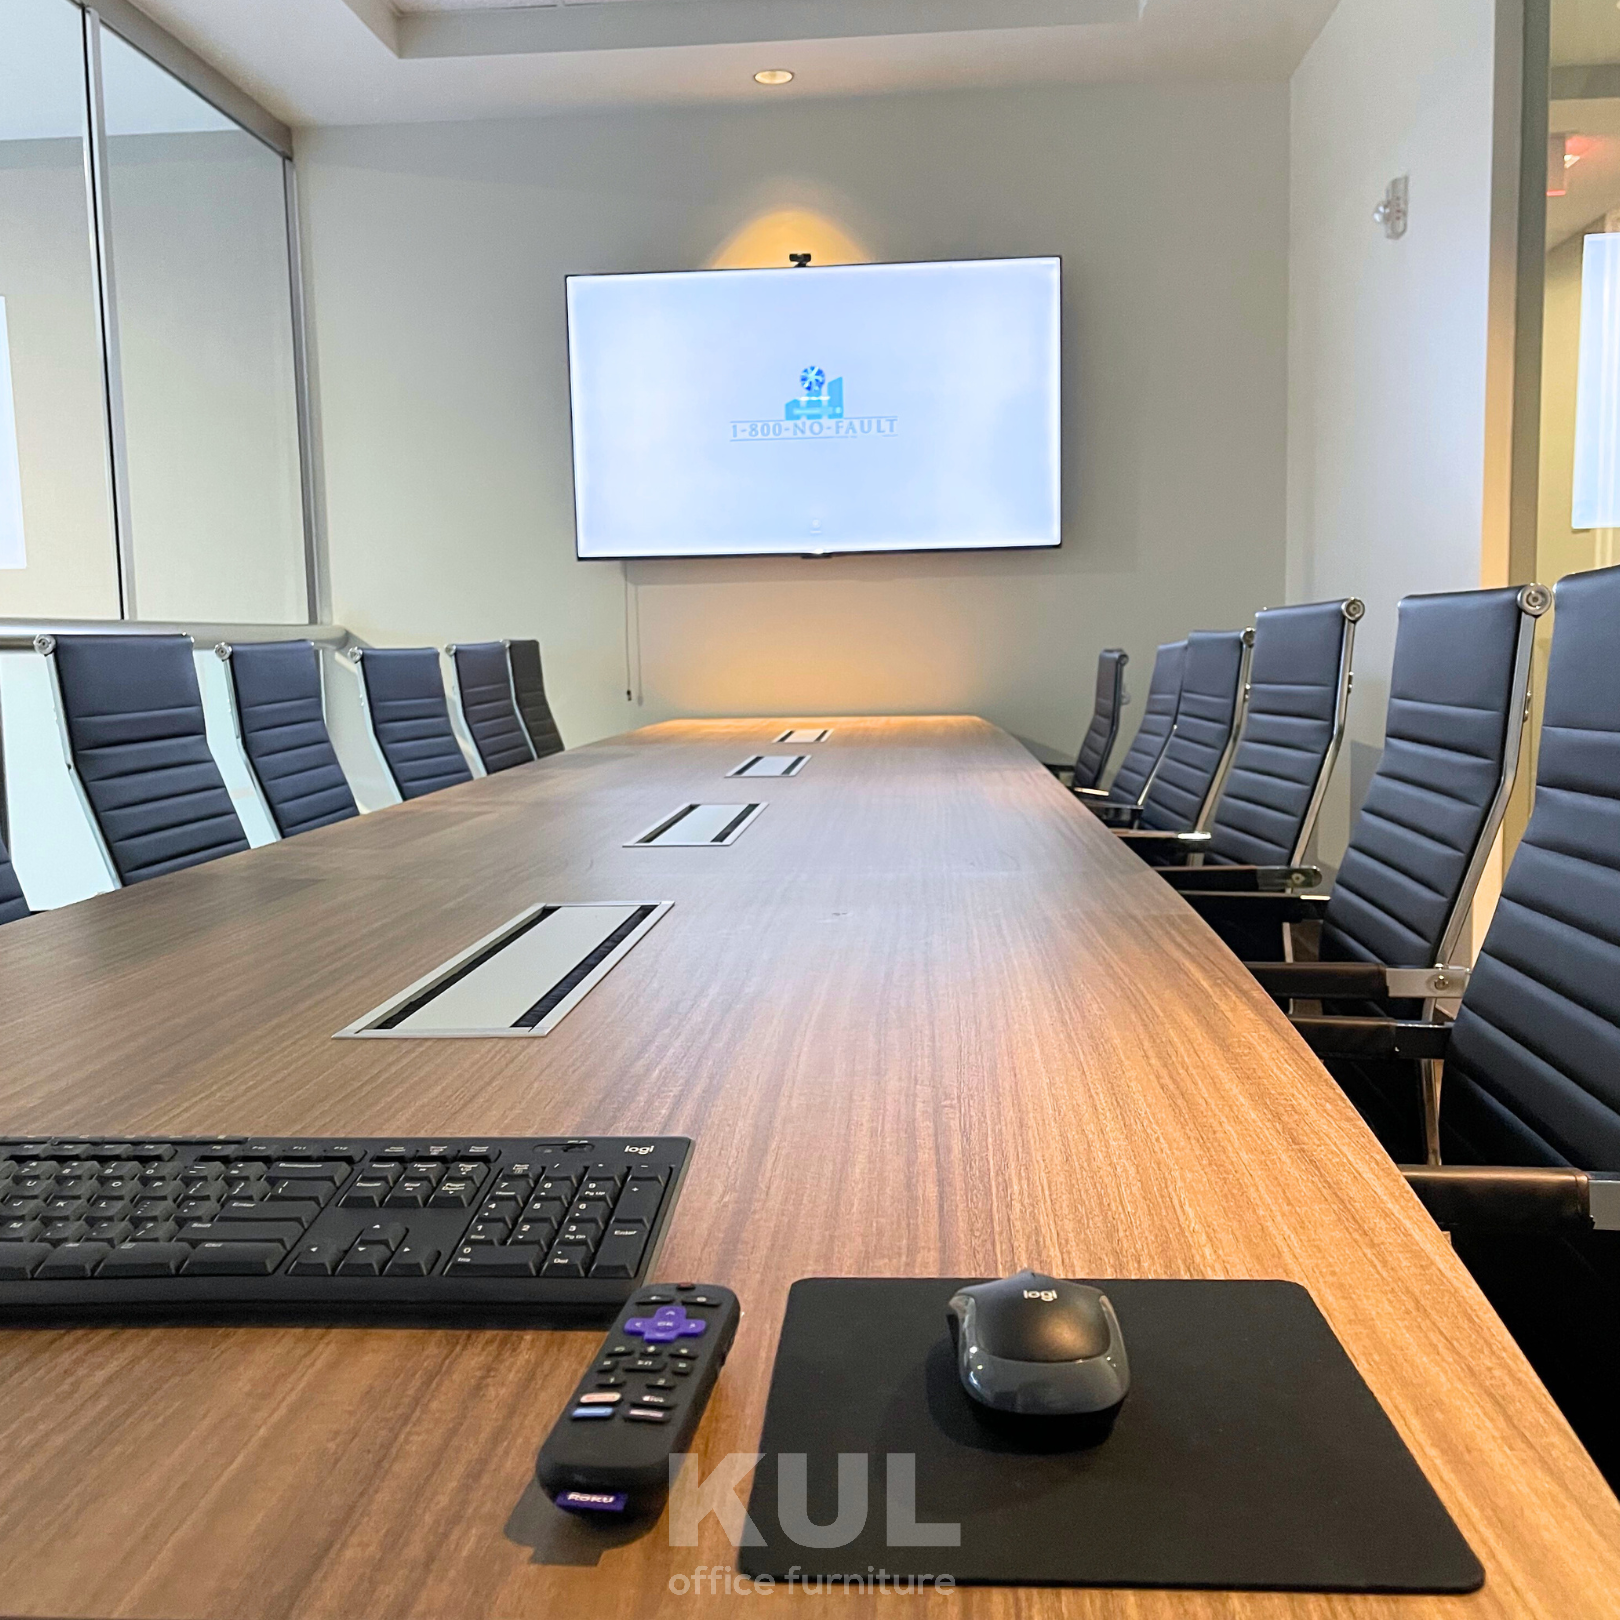 Power strip in center of boat shape conference table